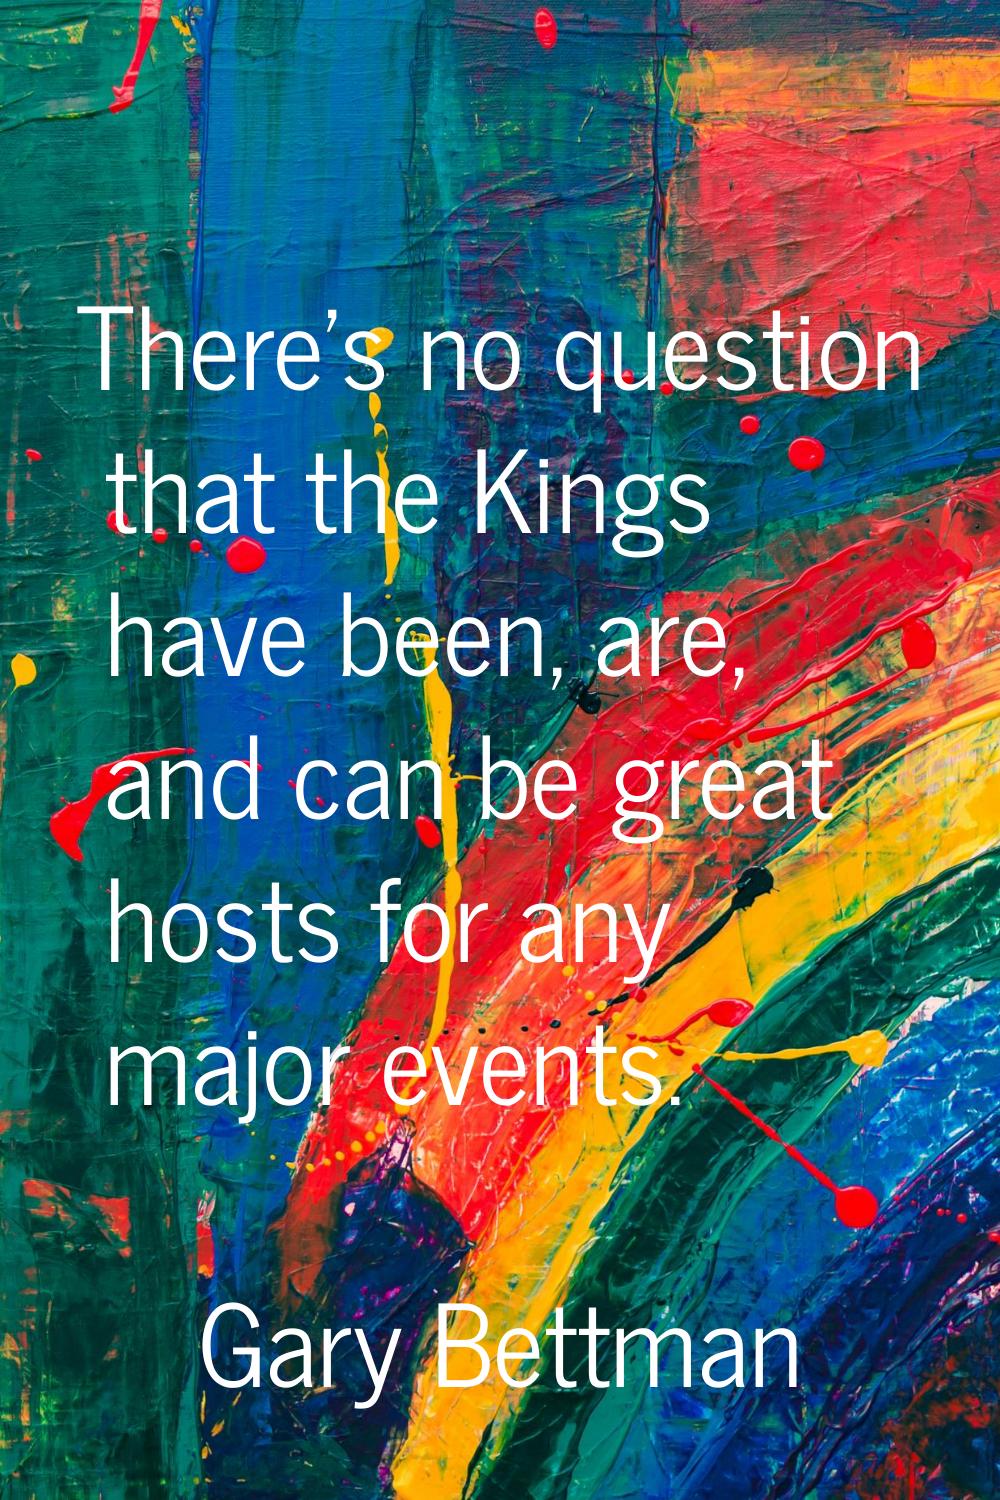 There's no question that the Kings have been, are, and can be great hosts for any major events.